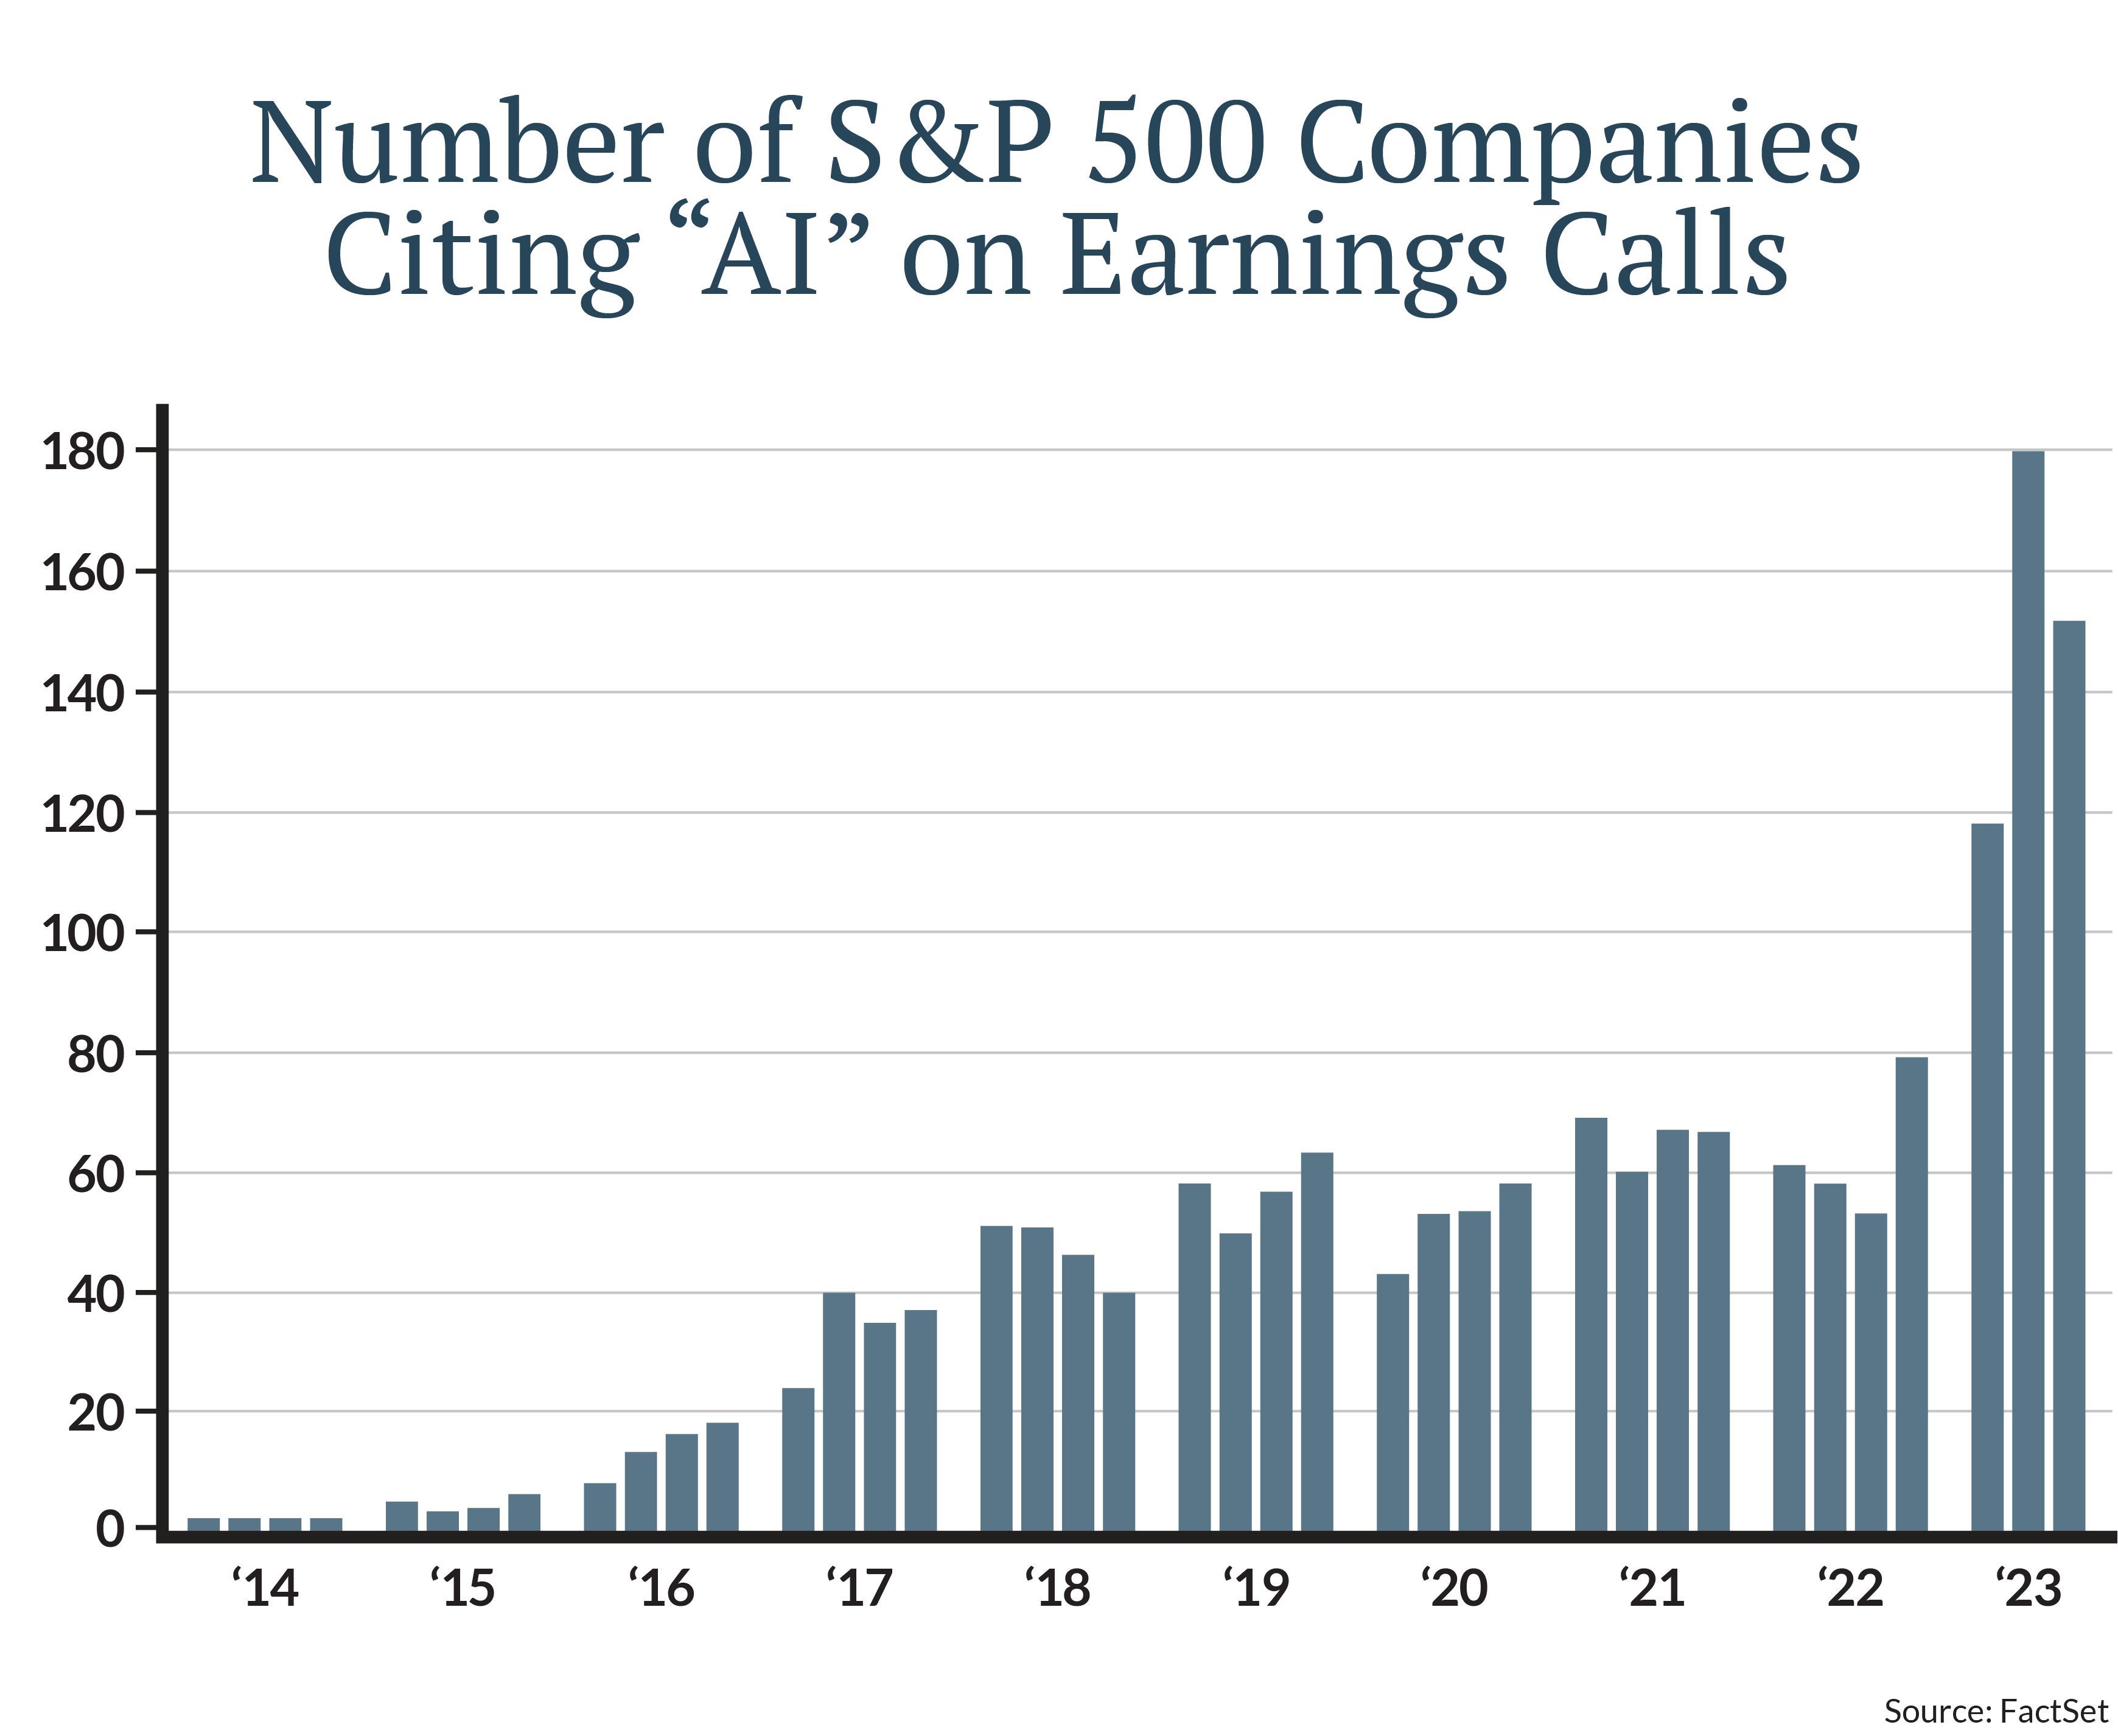 Number of S&P 500 Companies Citing AI on Earnings Calls